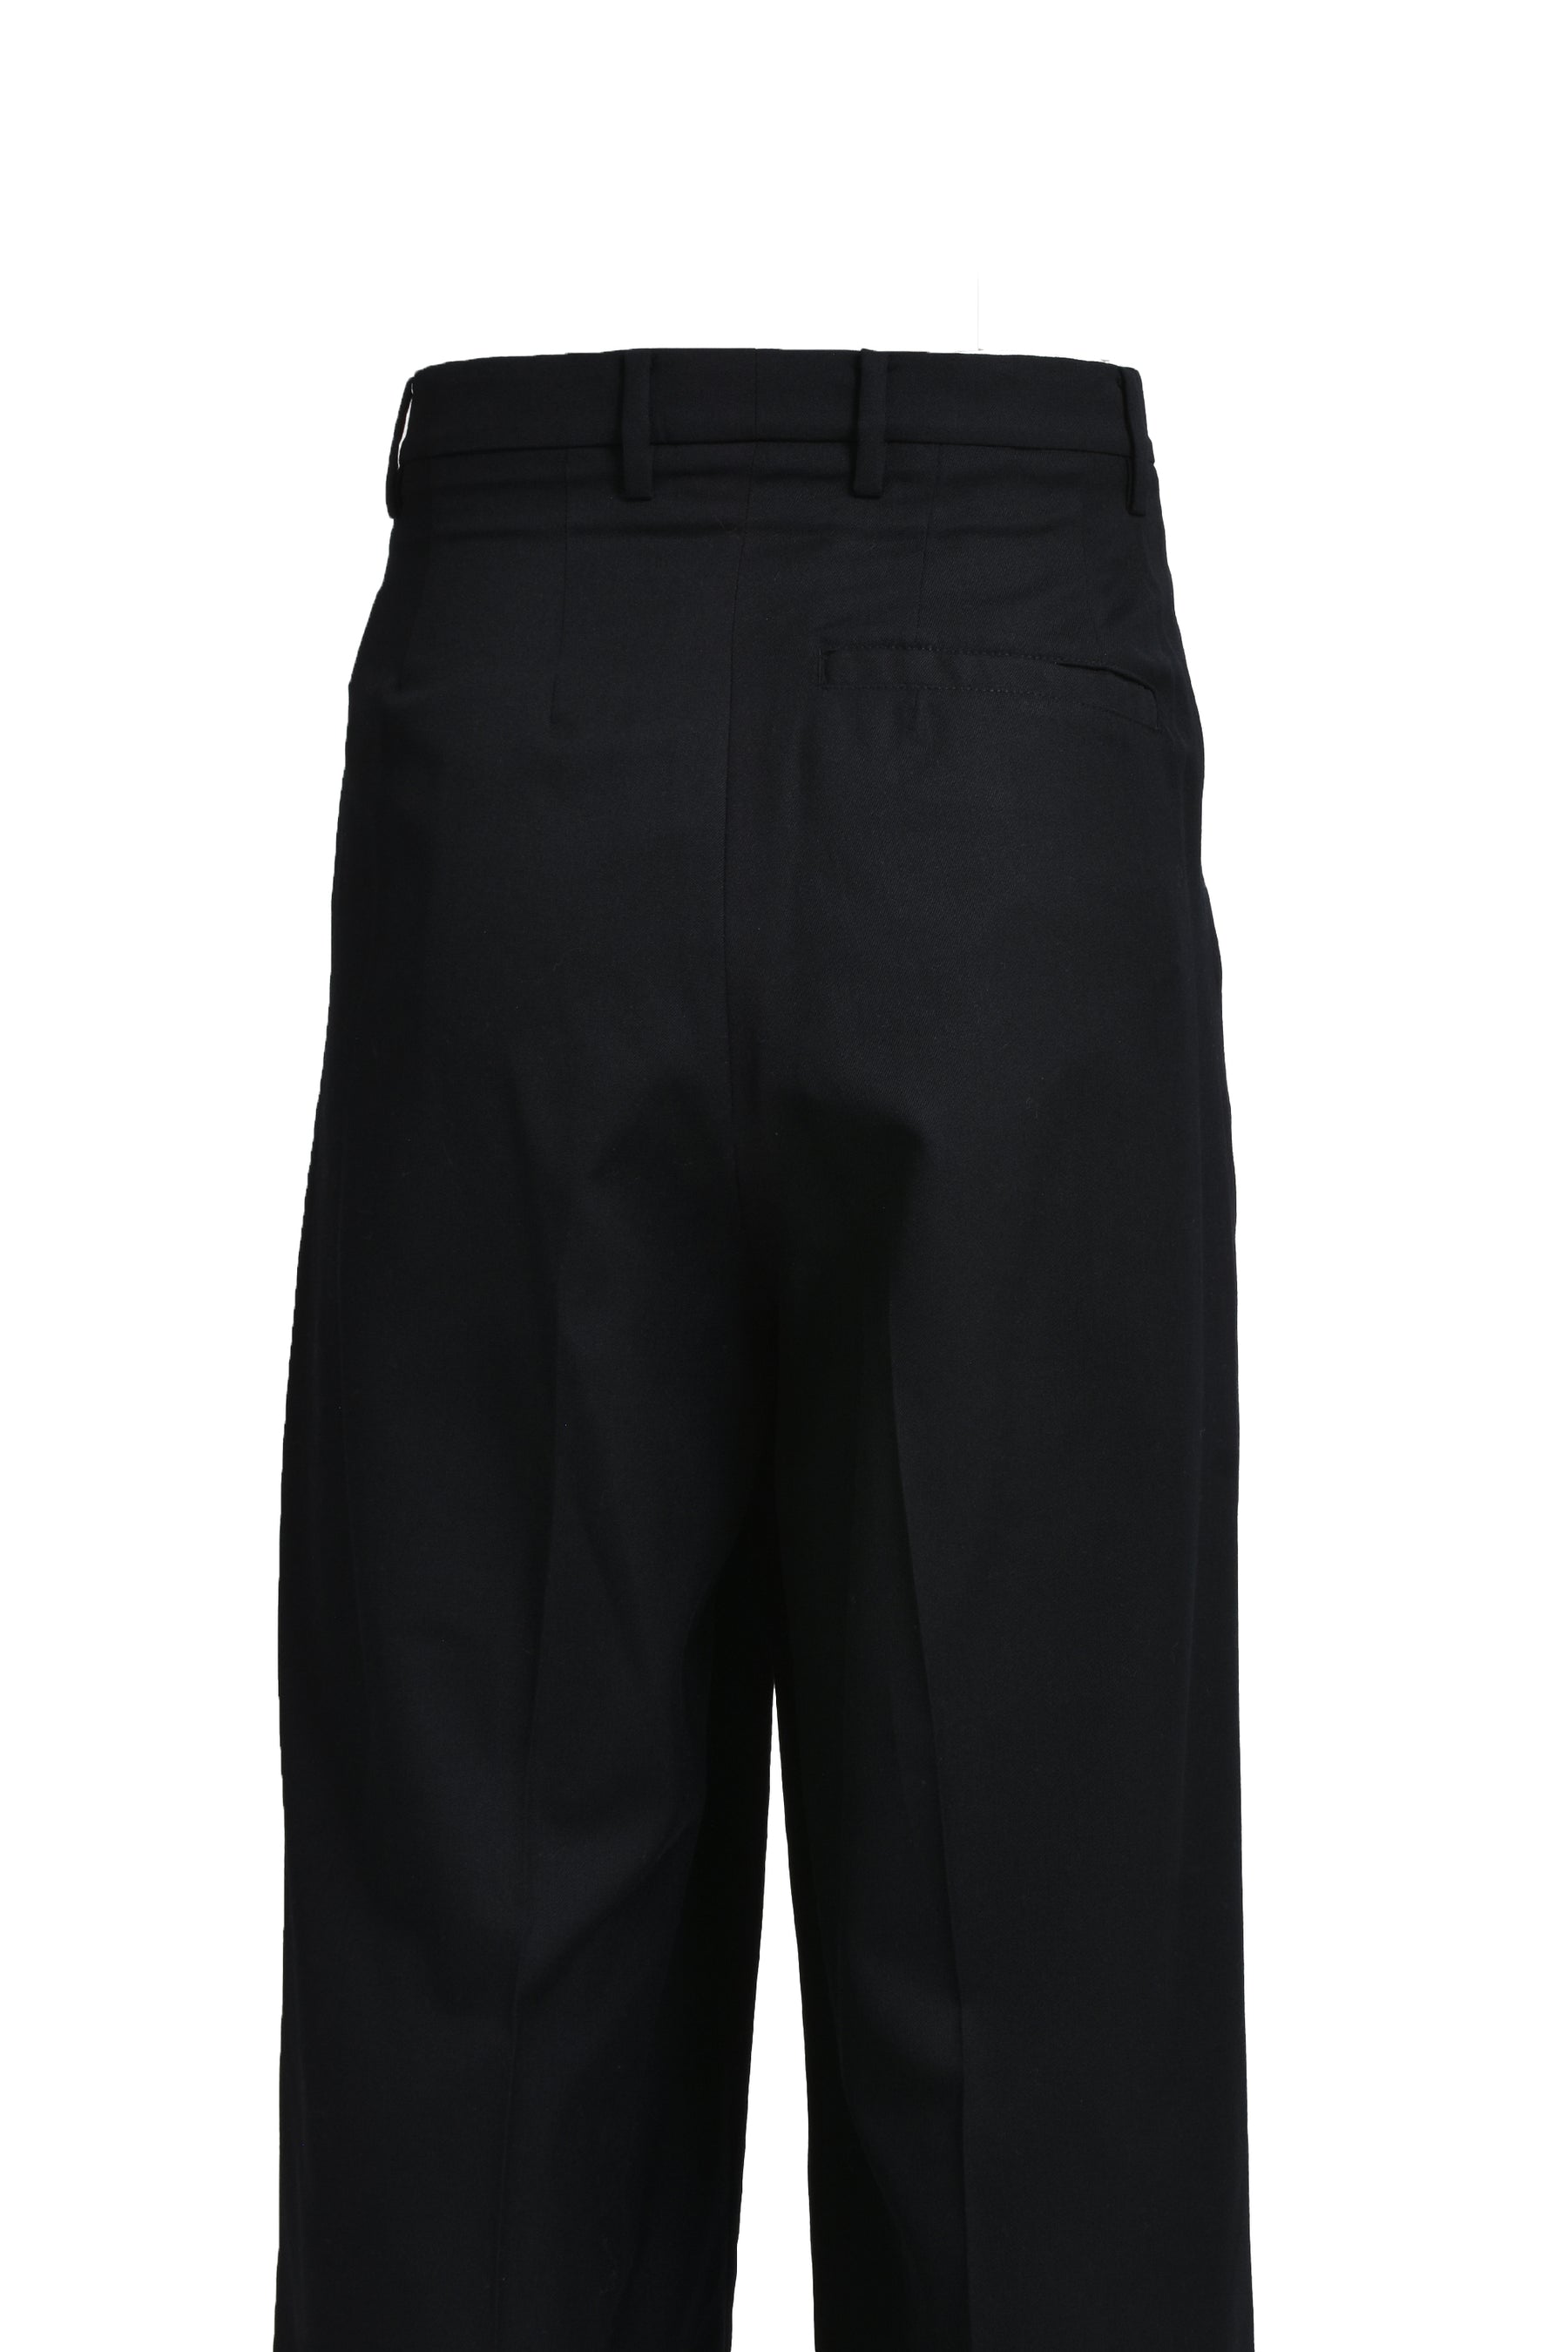 WIDE TROUSERS / BLK